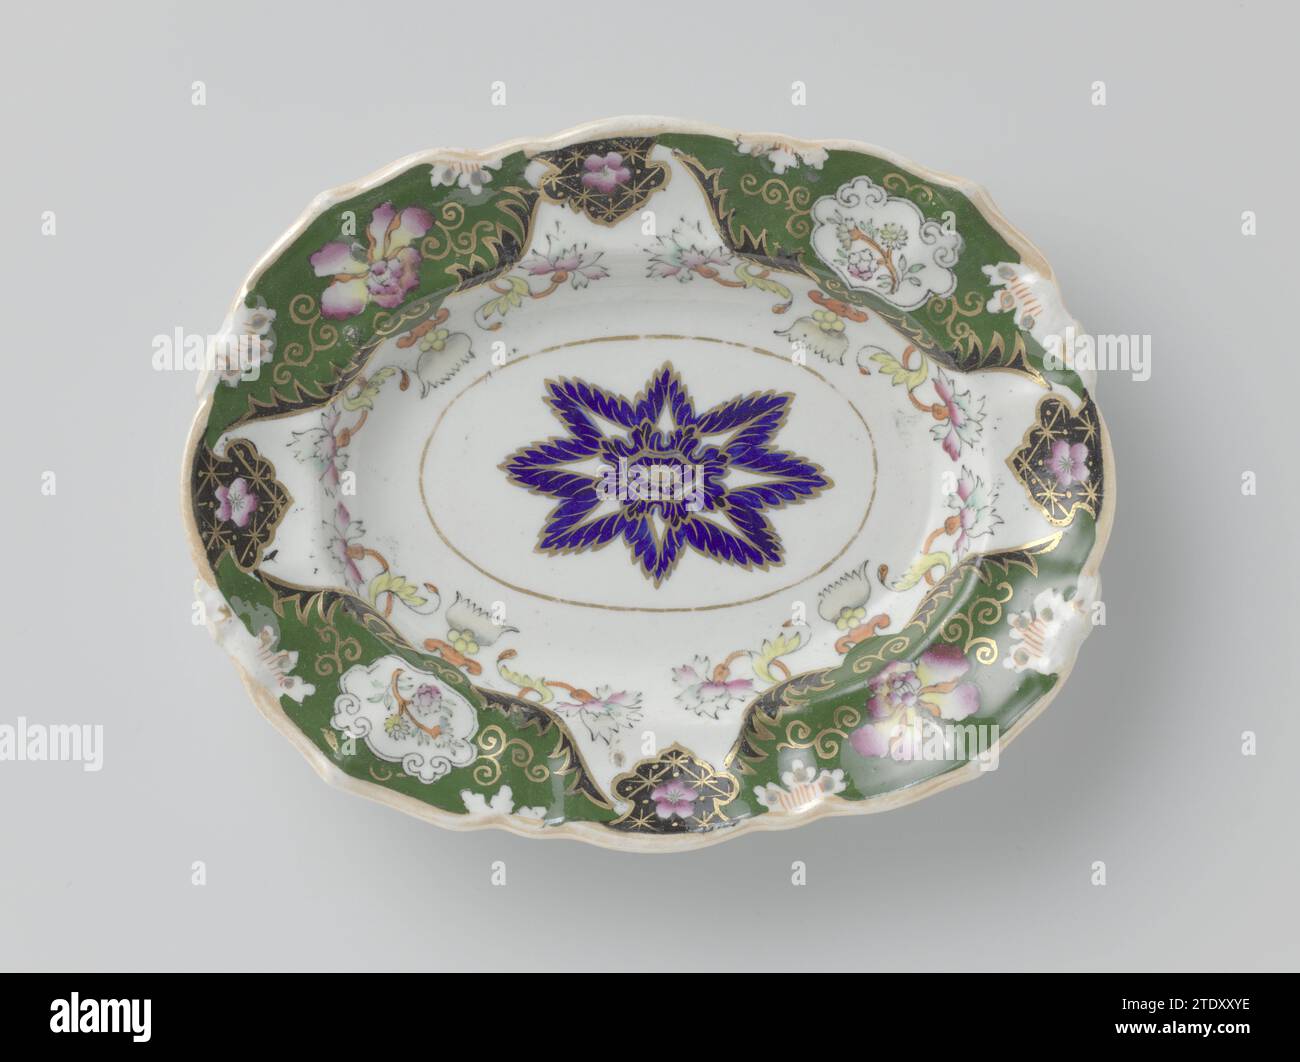 Scale, originally with ears, multi -colored painted with flowers and tendrils, Mason, 1840 - 1860 Porcelain bowl, originally with ears (ground) and multicolored painted with flowers and sities in the colors pink, green, red and yellow with black and gold, partly on dark green soil. In the middle a rosette of Bleu Foncé. Marked: Mason's patent Ironstone China. Fenton porcelain Porcelain bowl, originally with ears (ground) and multicolored painted with flowers and sities in the colors pink, green, red and yellow with black and gold, partly on dark green soil. In the middle a rosette of Bleu Fonc Stock Photo